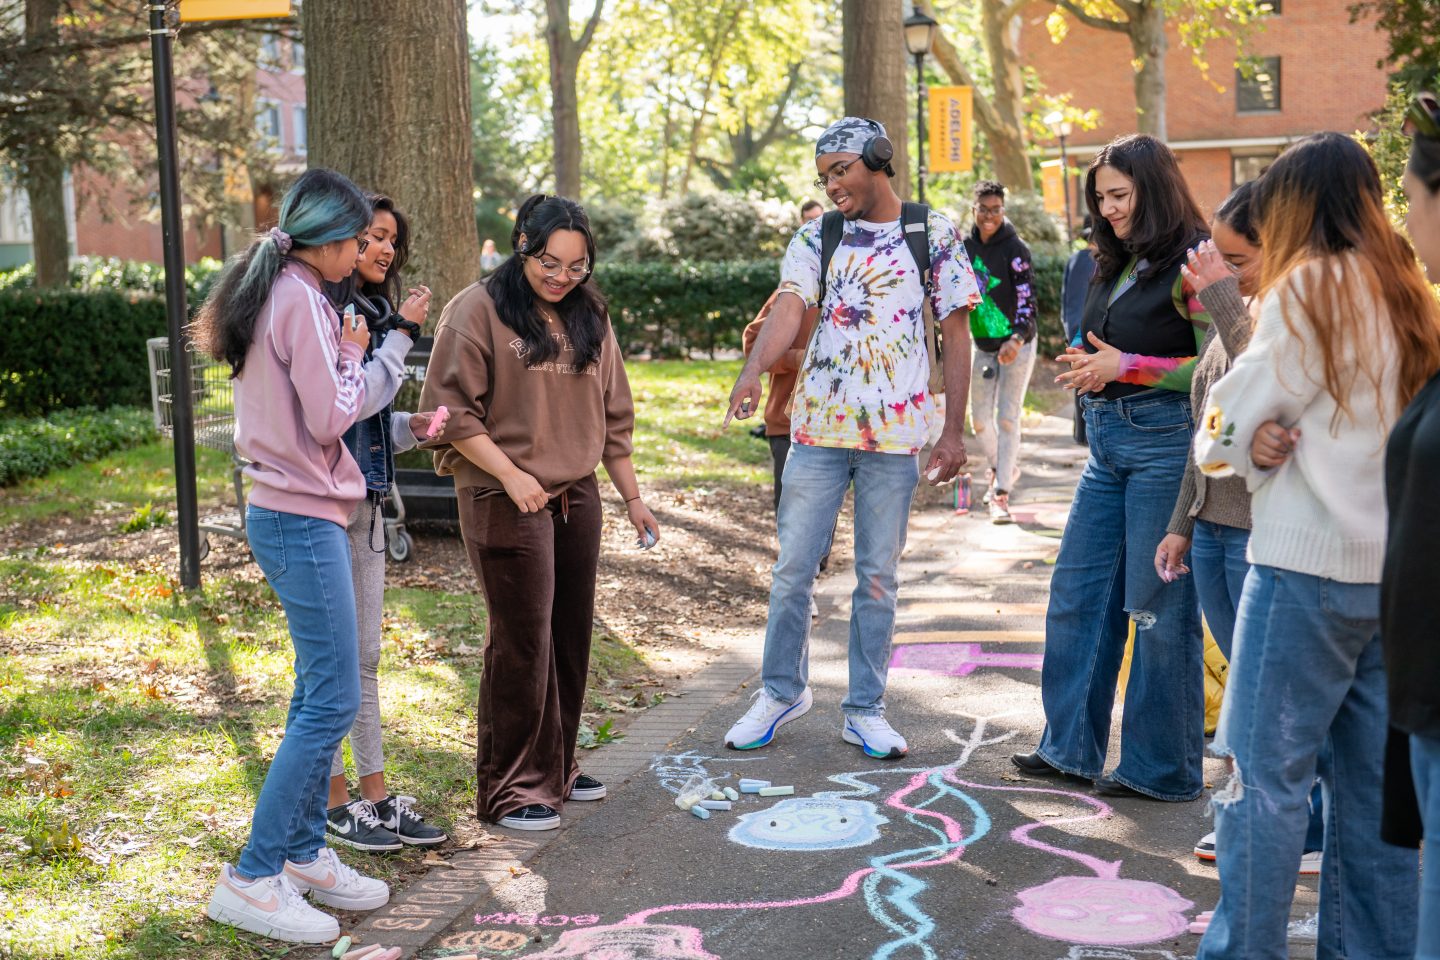 A group of students are smiling and admiring a chalk drawing on the ground.